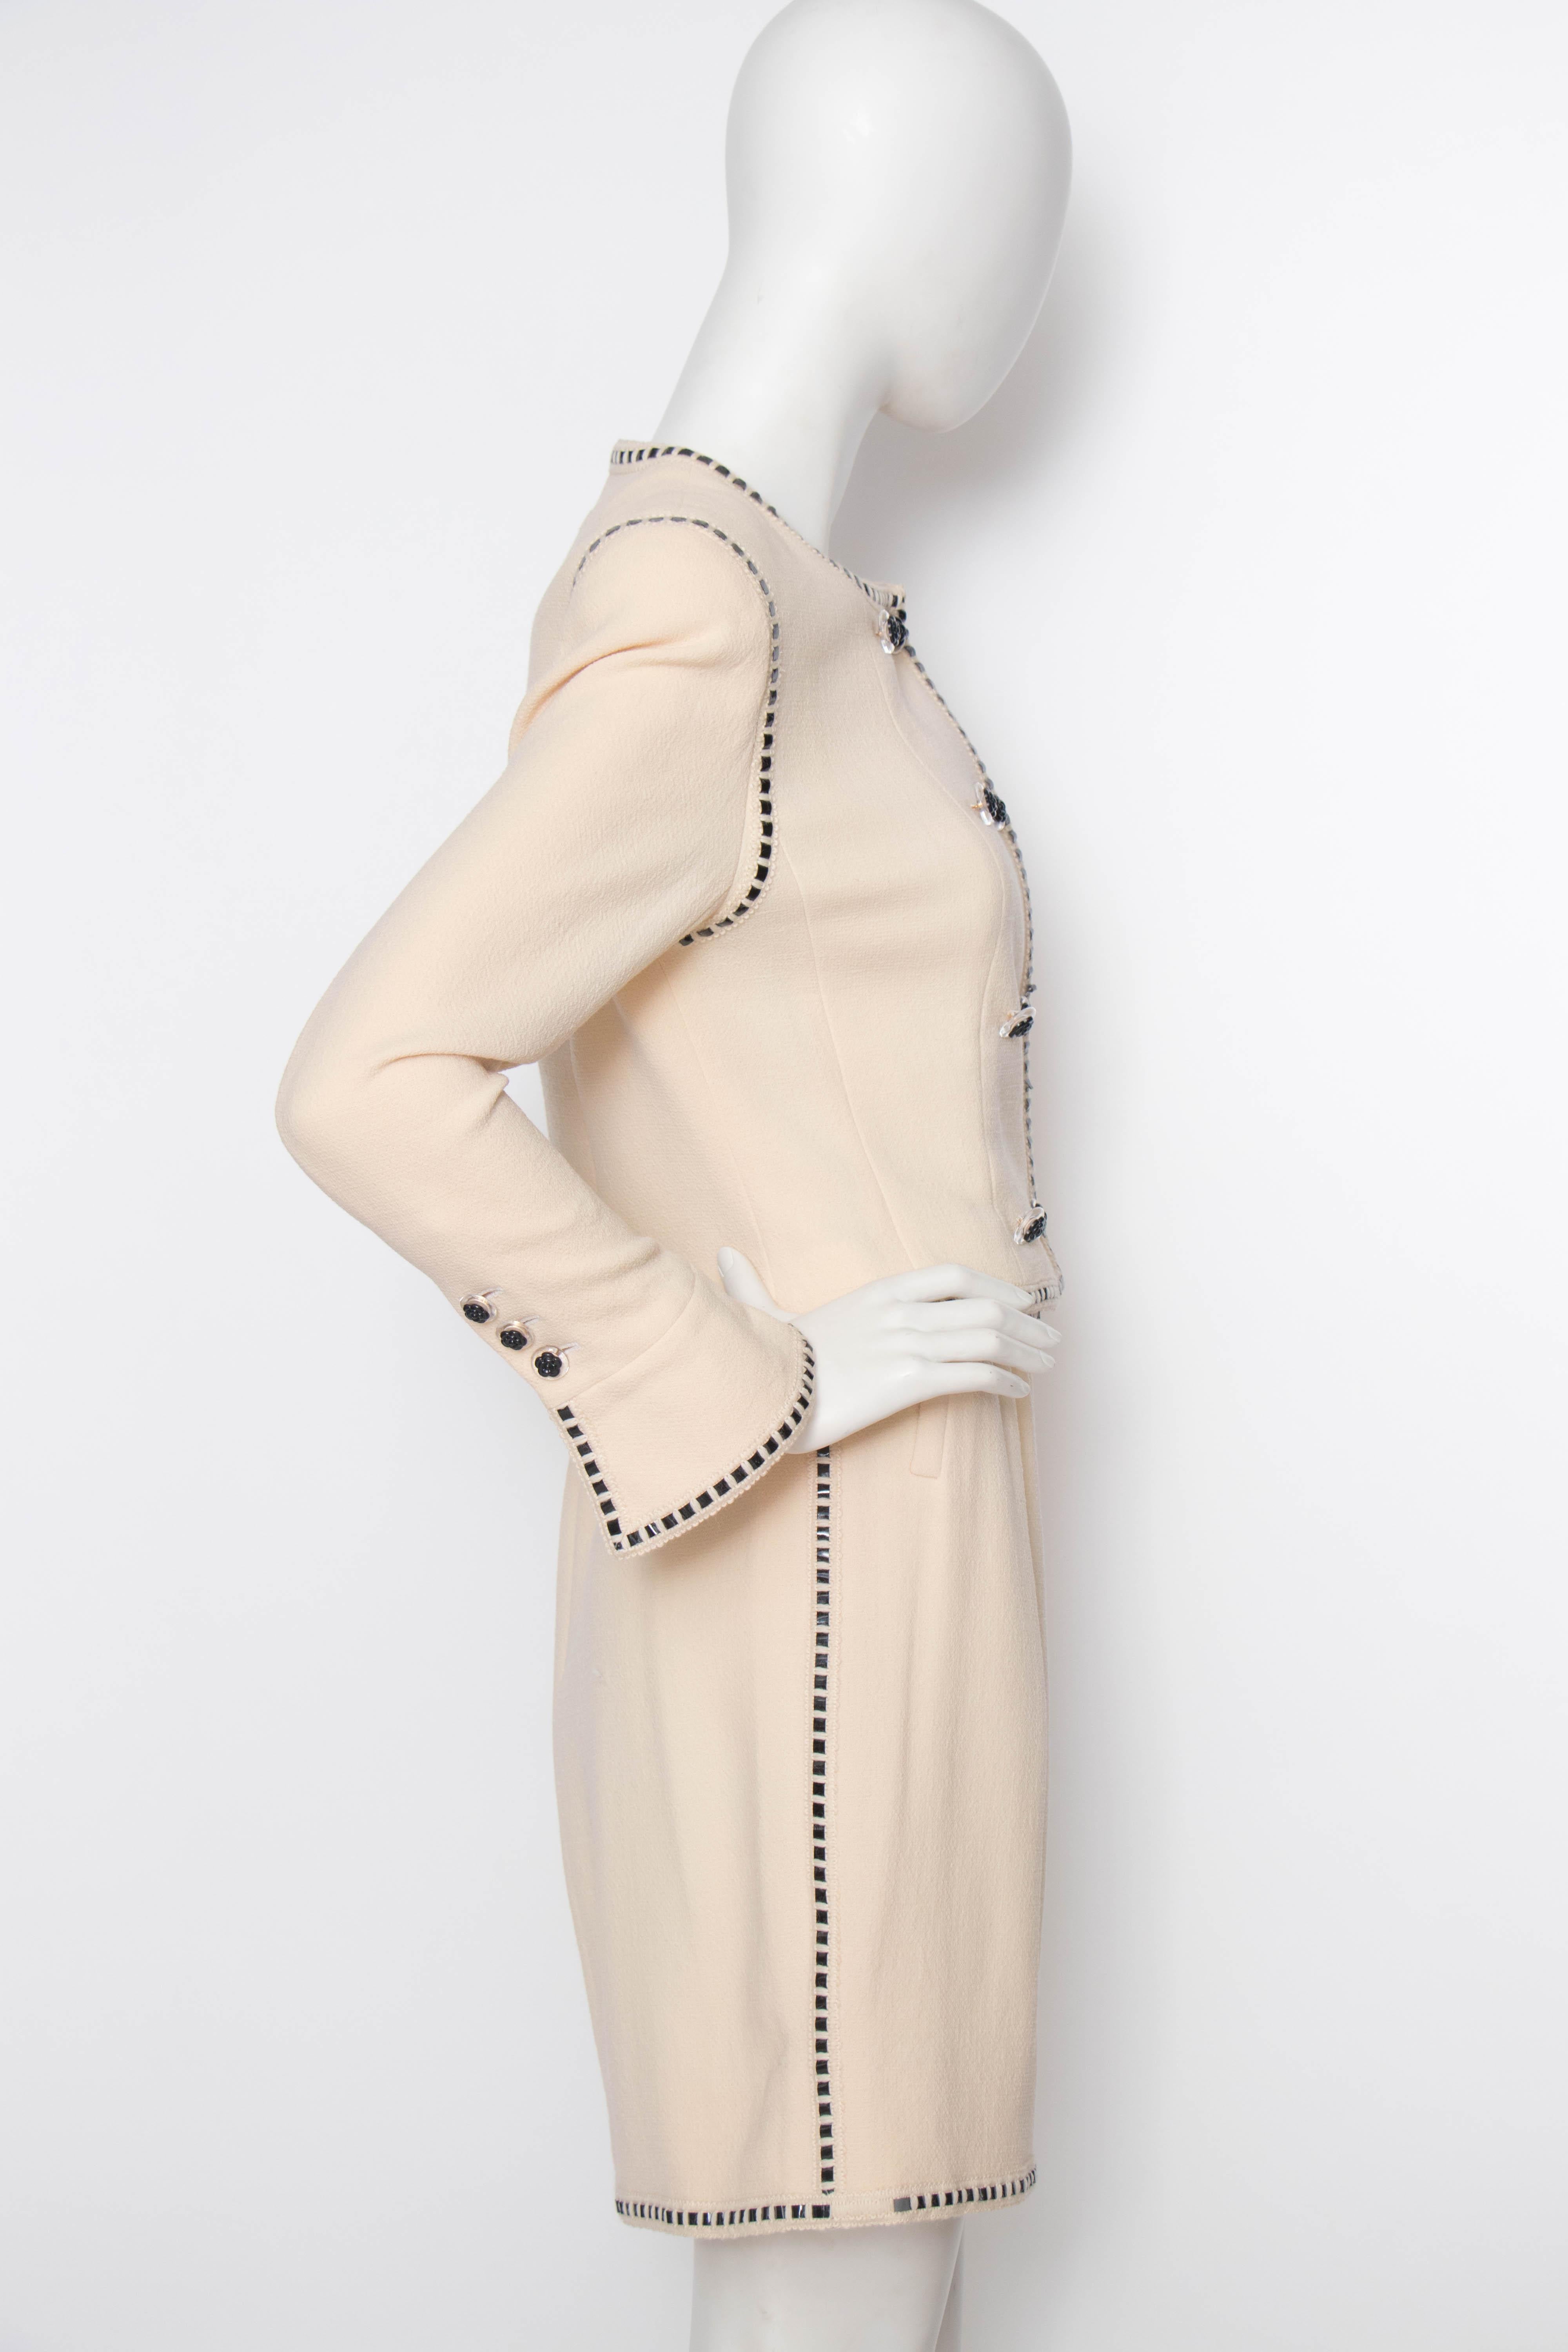 A classic ivory Chanel skirt suit consisting of a fitted pencil skirt and cropped jacket. The jacket has a double-breasted closure and incredibly detailed cuffs. Both the skirt and jacket have black PVC trim. The Chanel buttons consist of a clear